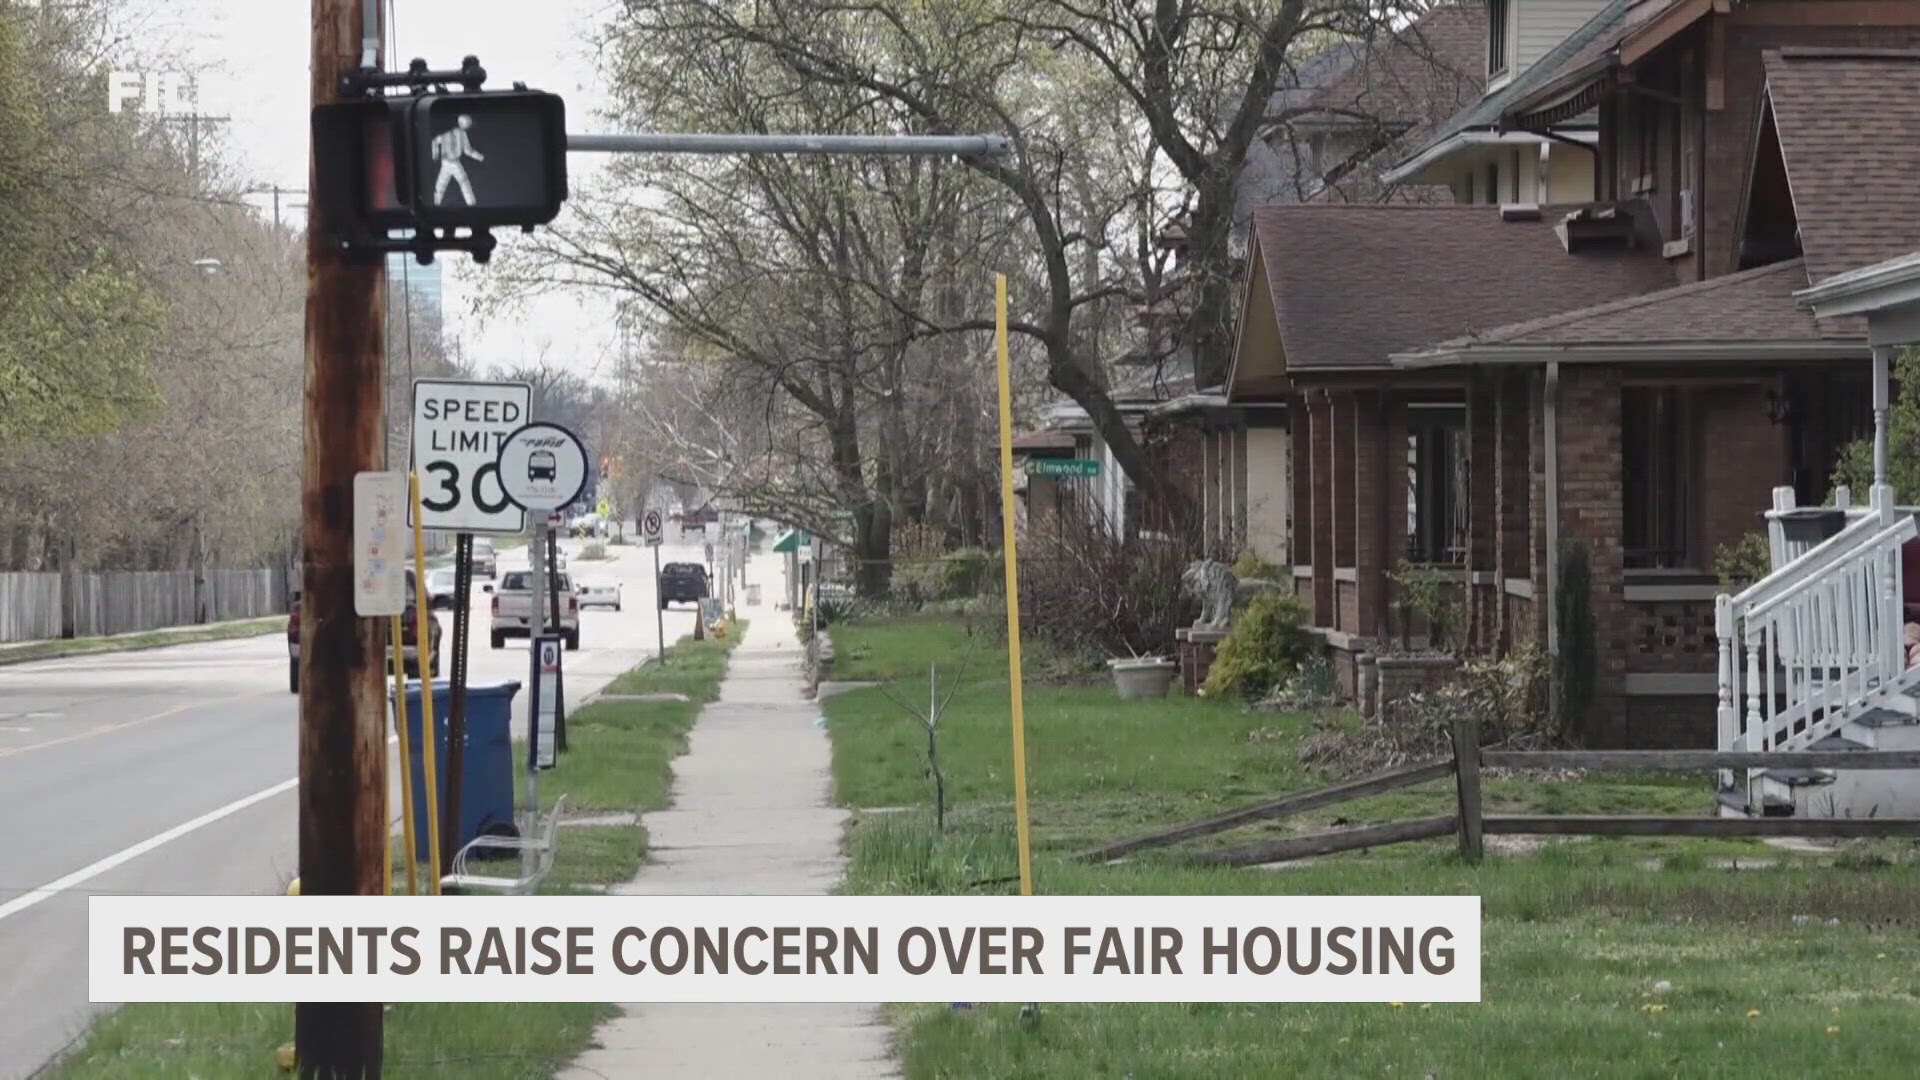 The public hearing on housing discrimination was held Sunday to address the community's concerns.